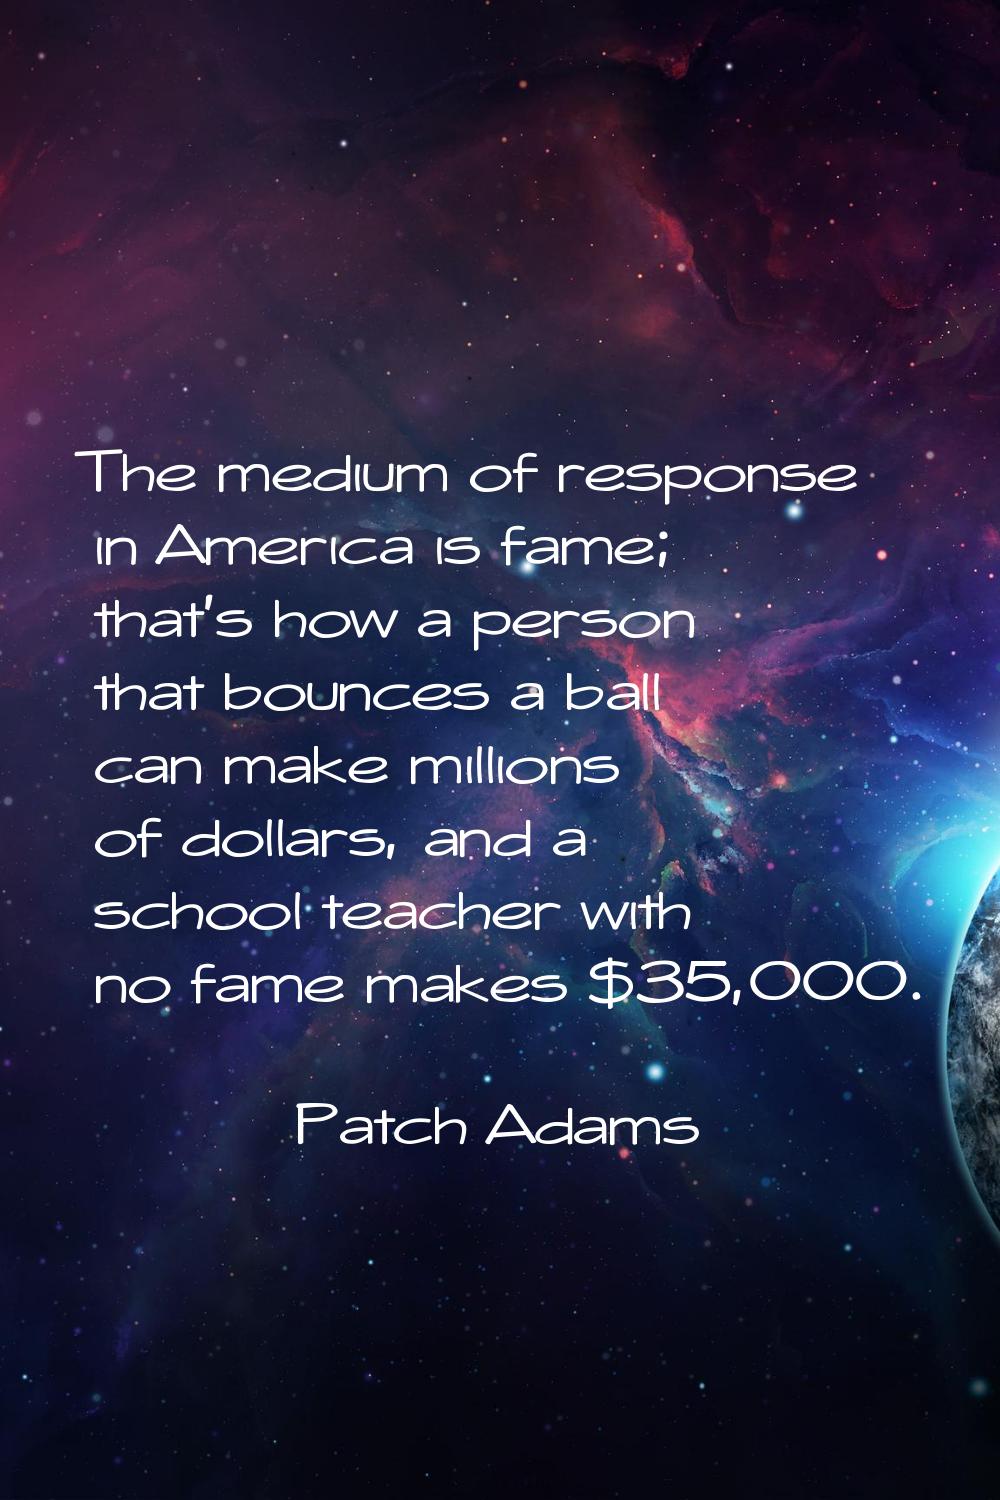 The medium of response in America is fame; that's how a person that bounces a ball can make million